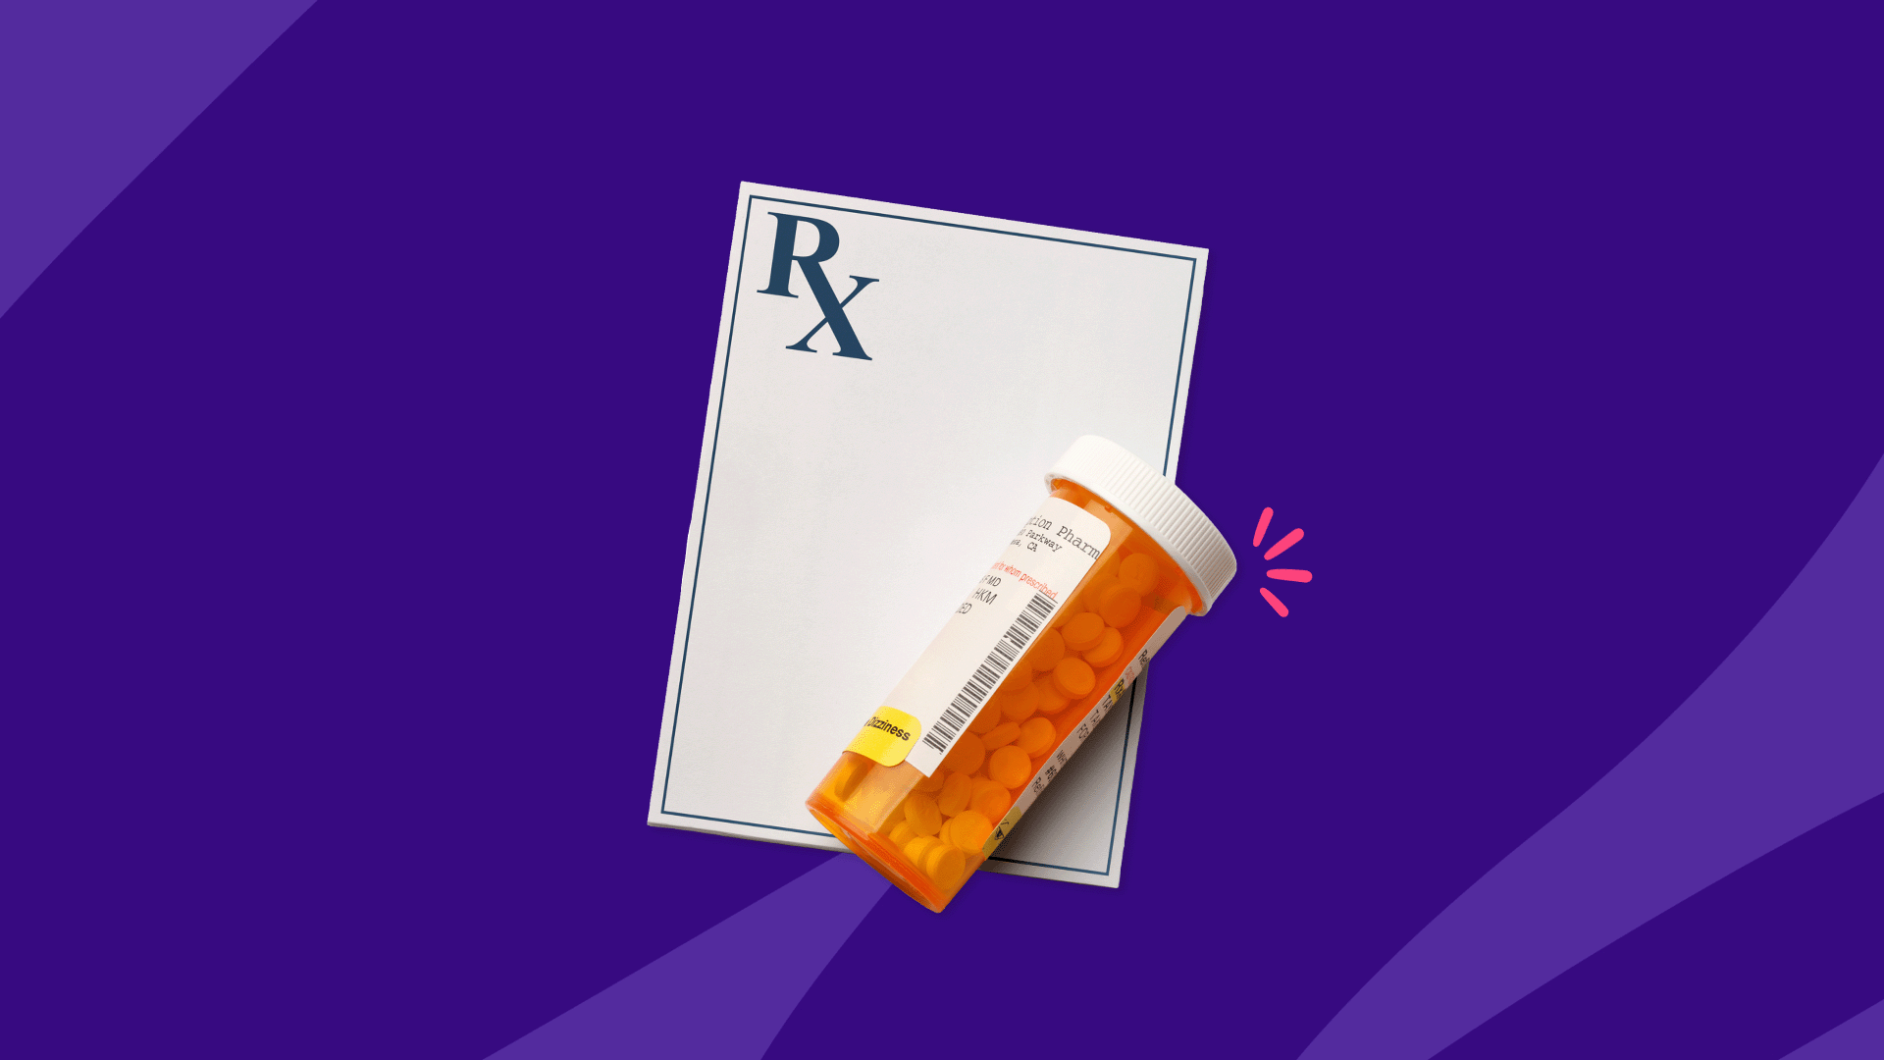 Rx pill bottle and prescription pad: Accutane side effects